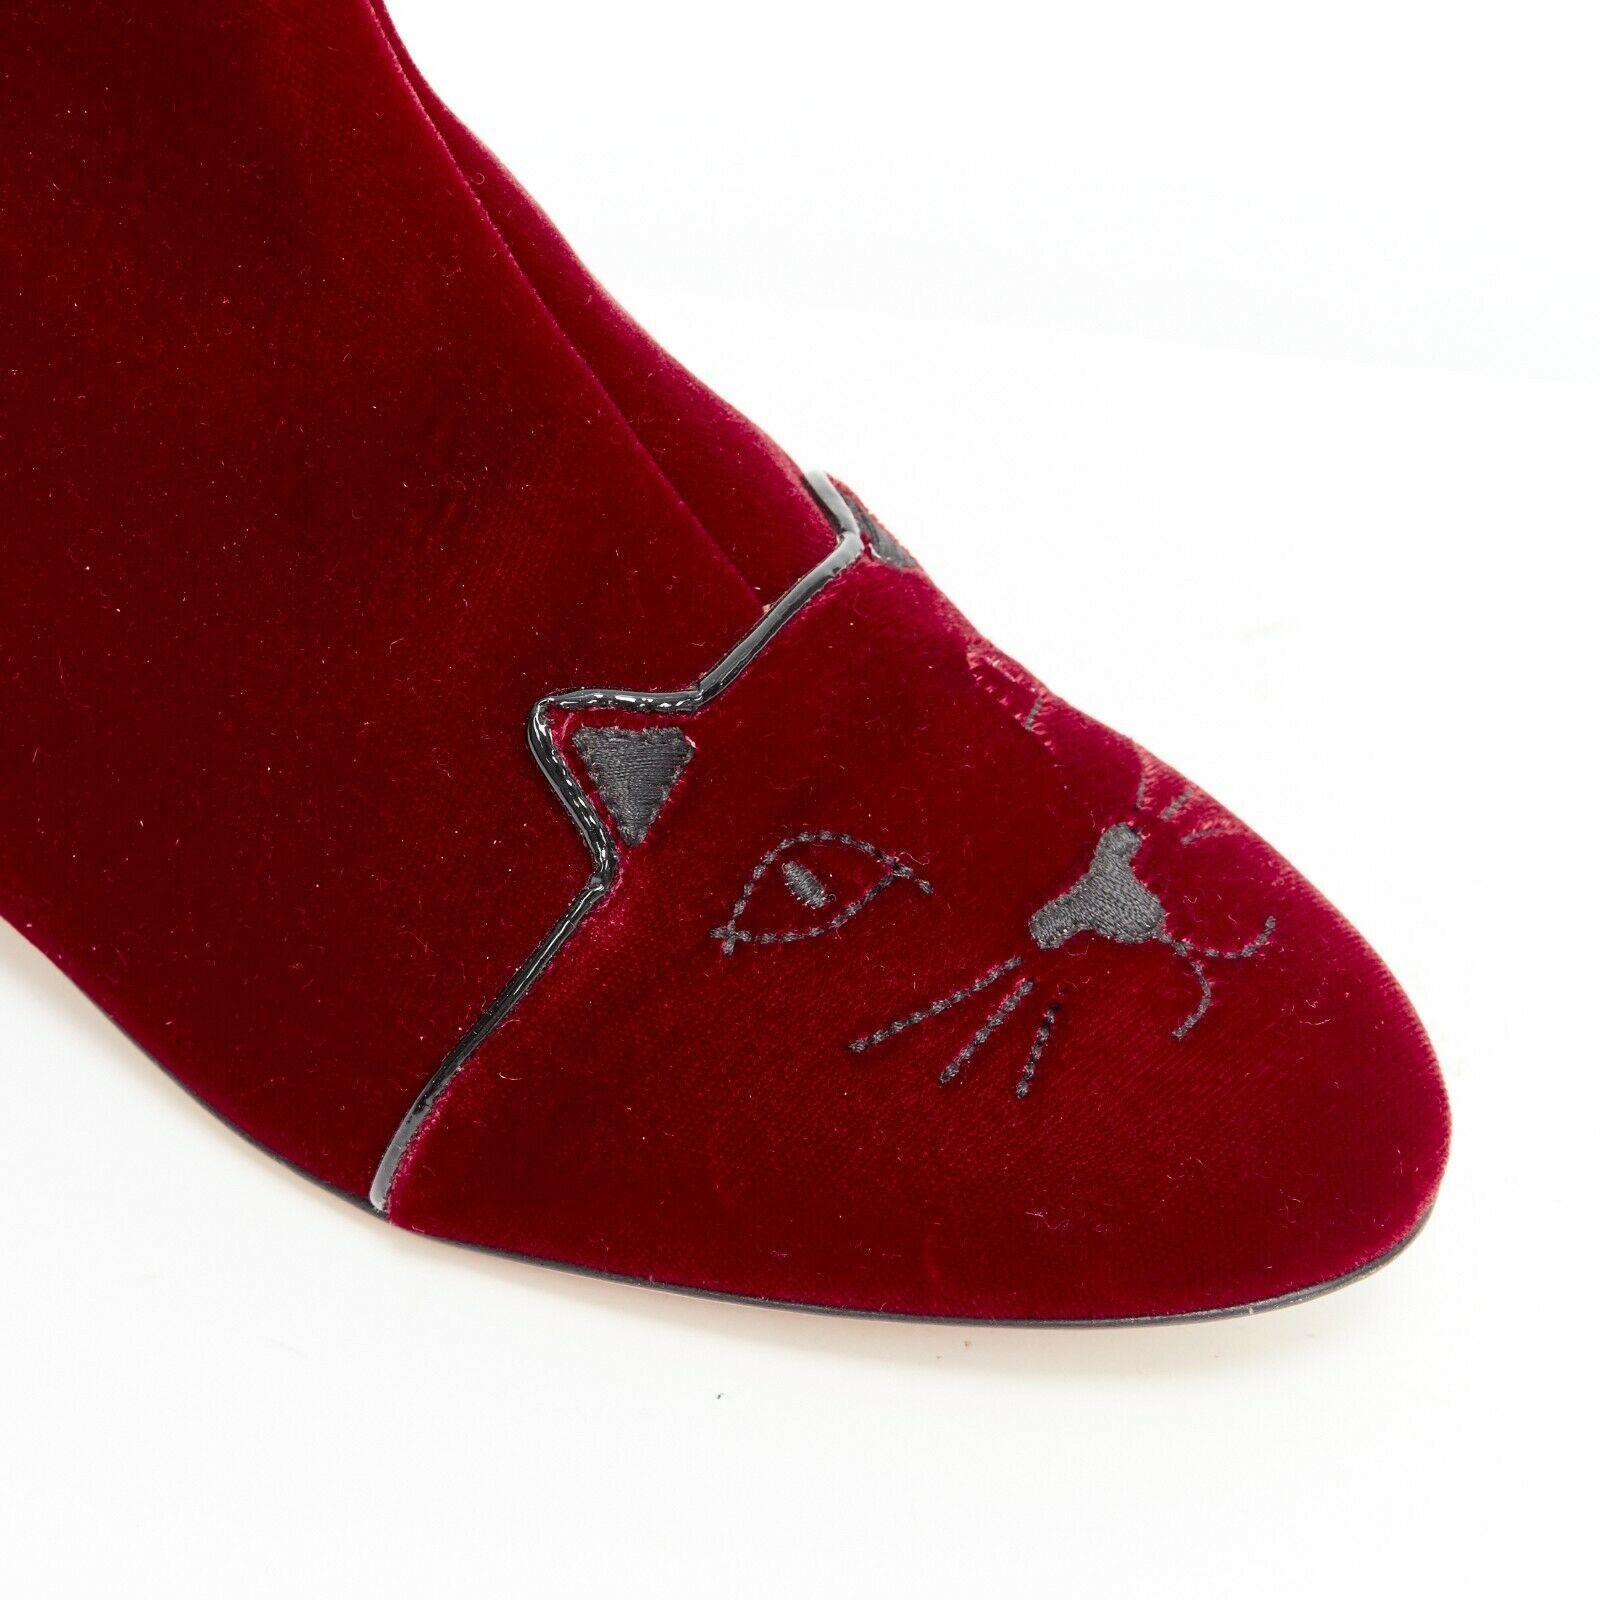 new CHARLOTTE OLYMPIA red Velvet Puss kitty embroidery flat ankle boot EU37.5
CHARLOTTE OLYMPIA
Velvet Puss boots. 
Red velvet upper. 
Black thread signature Kitty face embroidery at toe cap. 
Round toe. 
Tonal stitching. 
Black patent piping